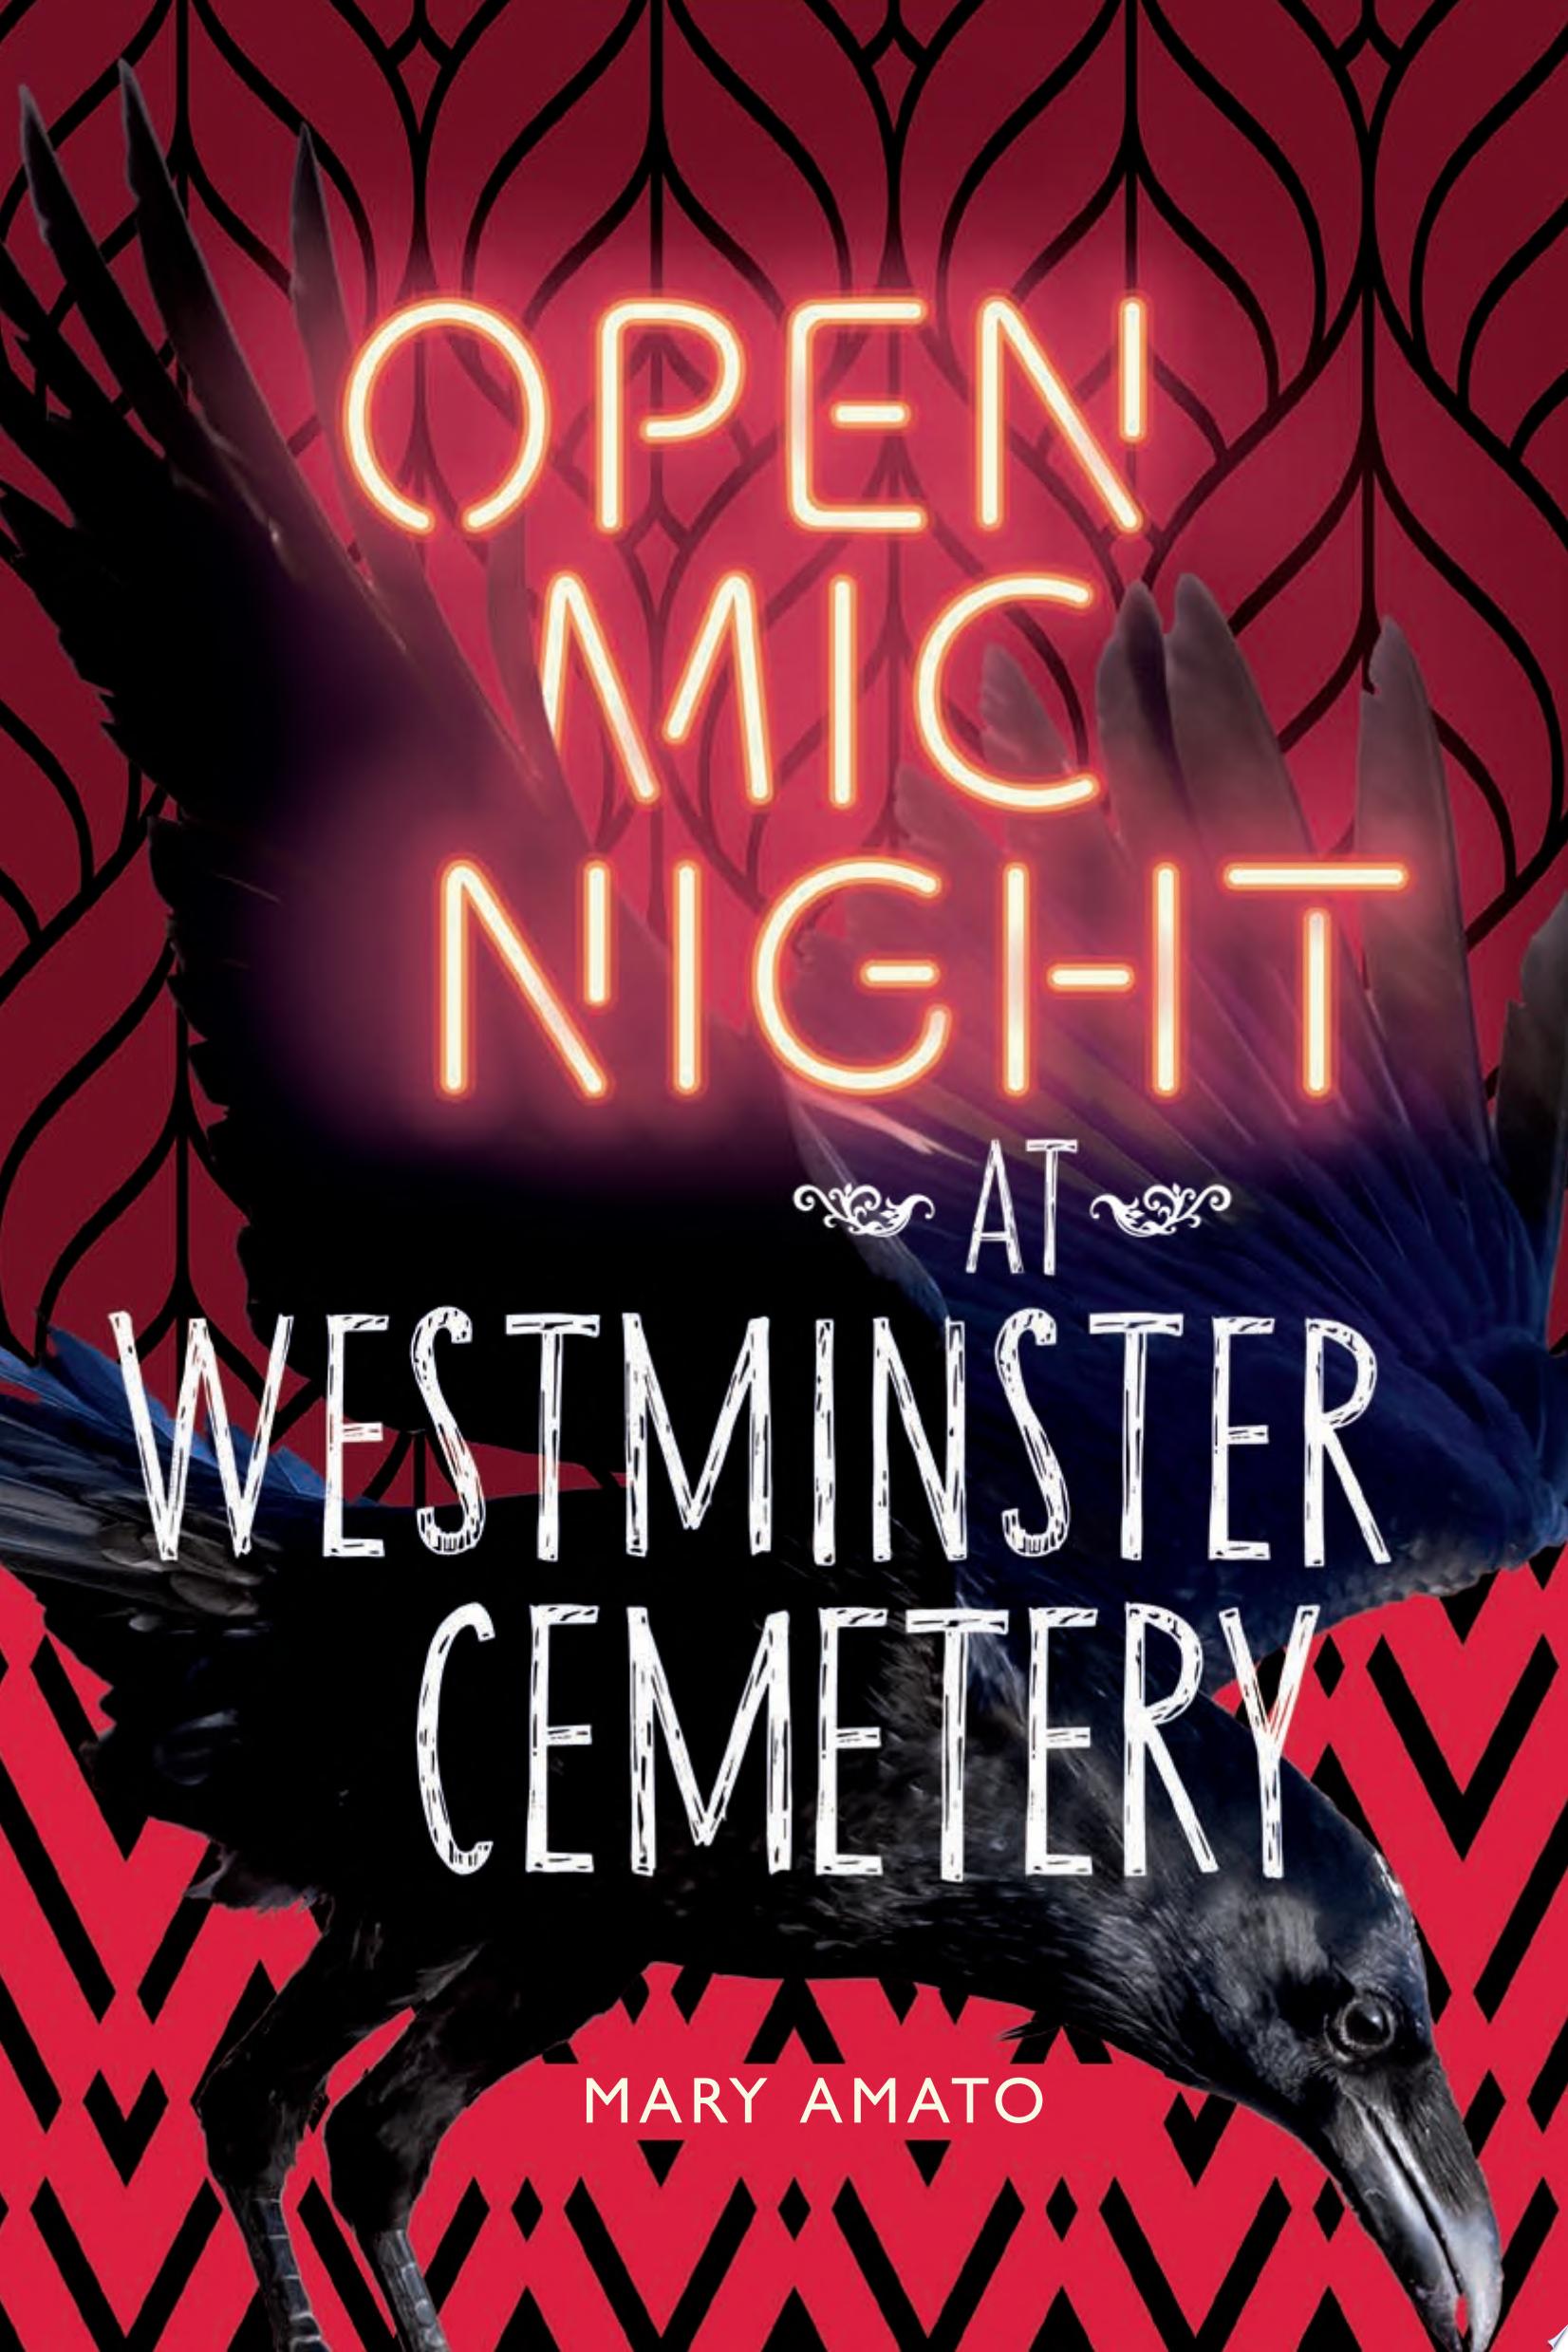 Image for "Open Mic Night at Westminster Cemetery"